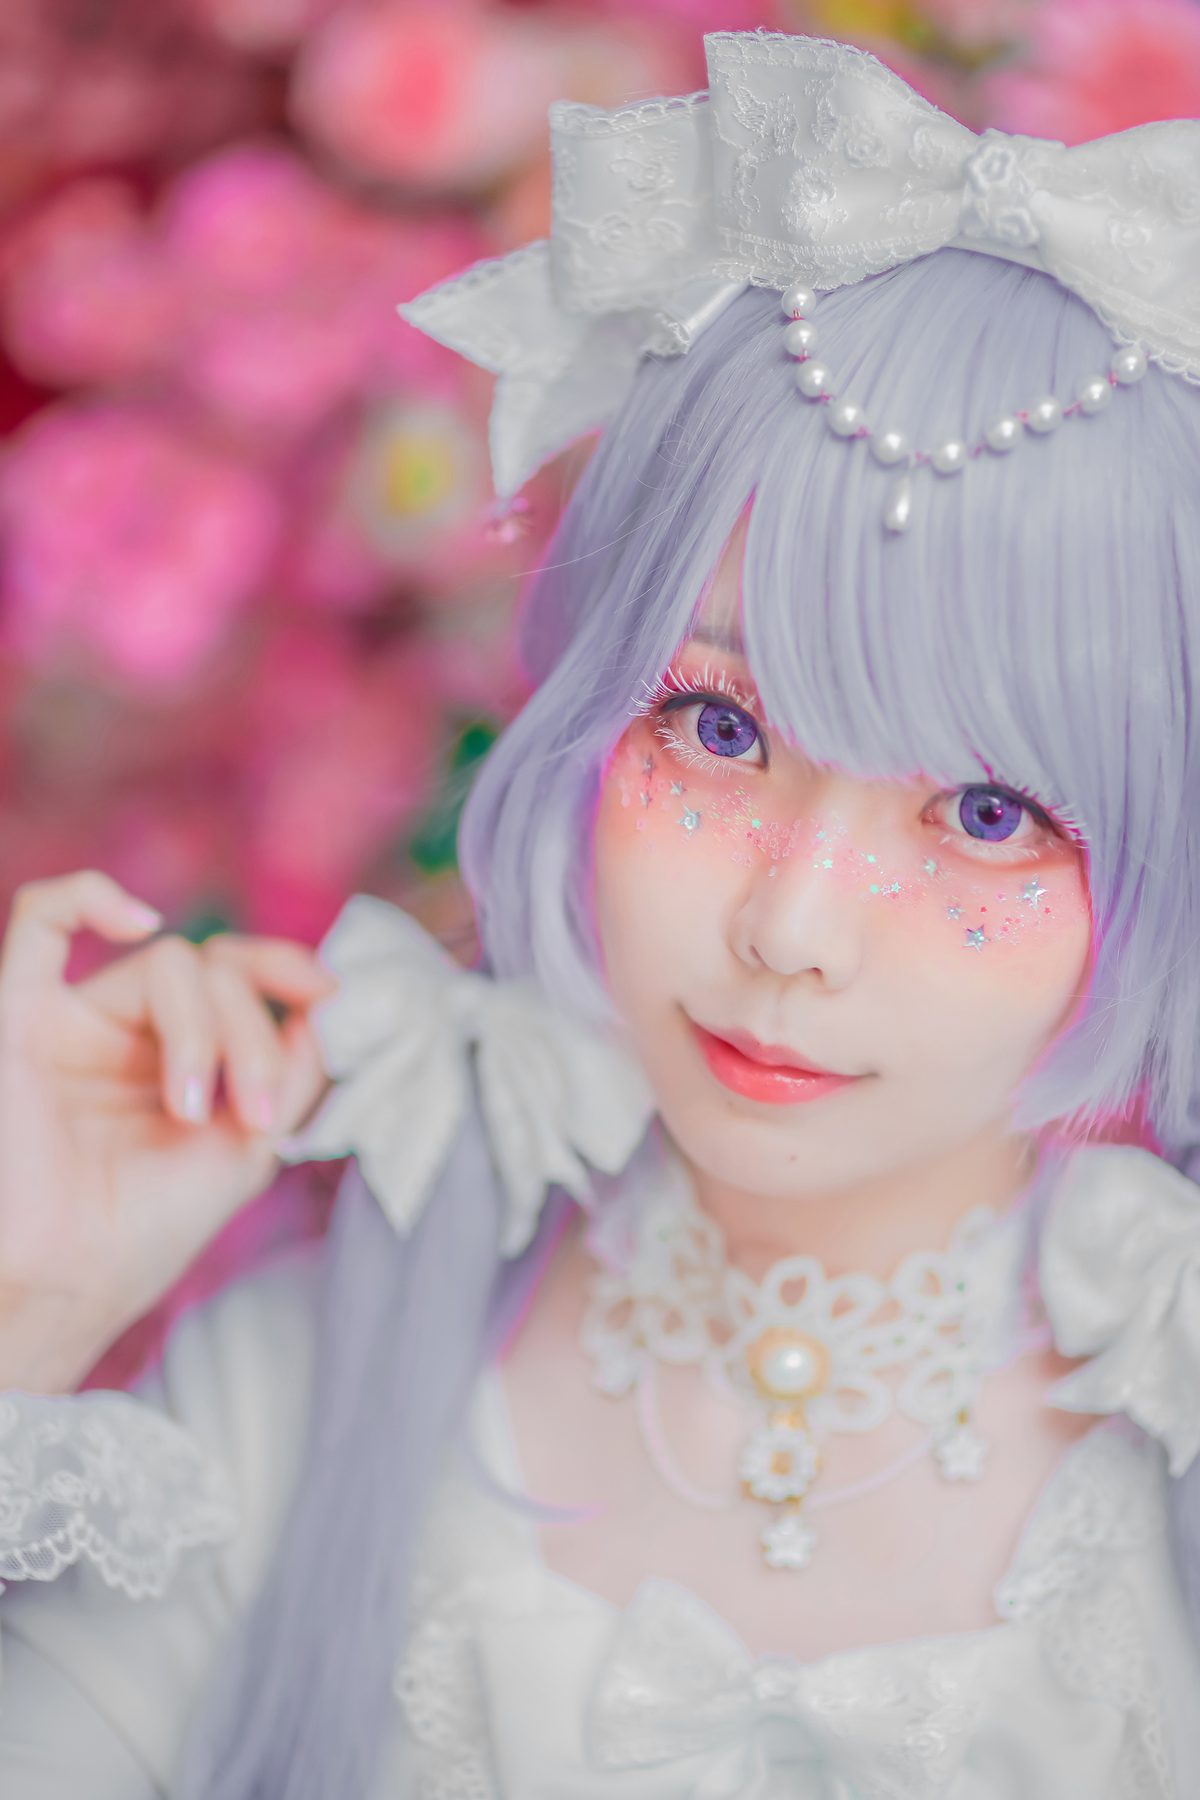 Coser@Ely_eee ElyEE子 TUESDAY TWINTAIL A 0055 6937930447.jpg